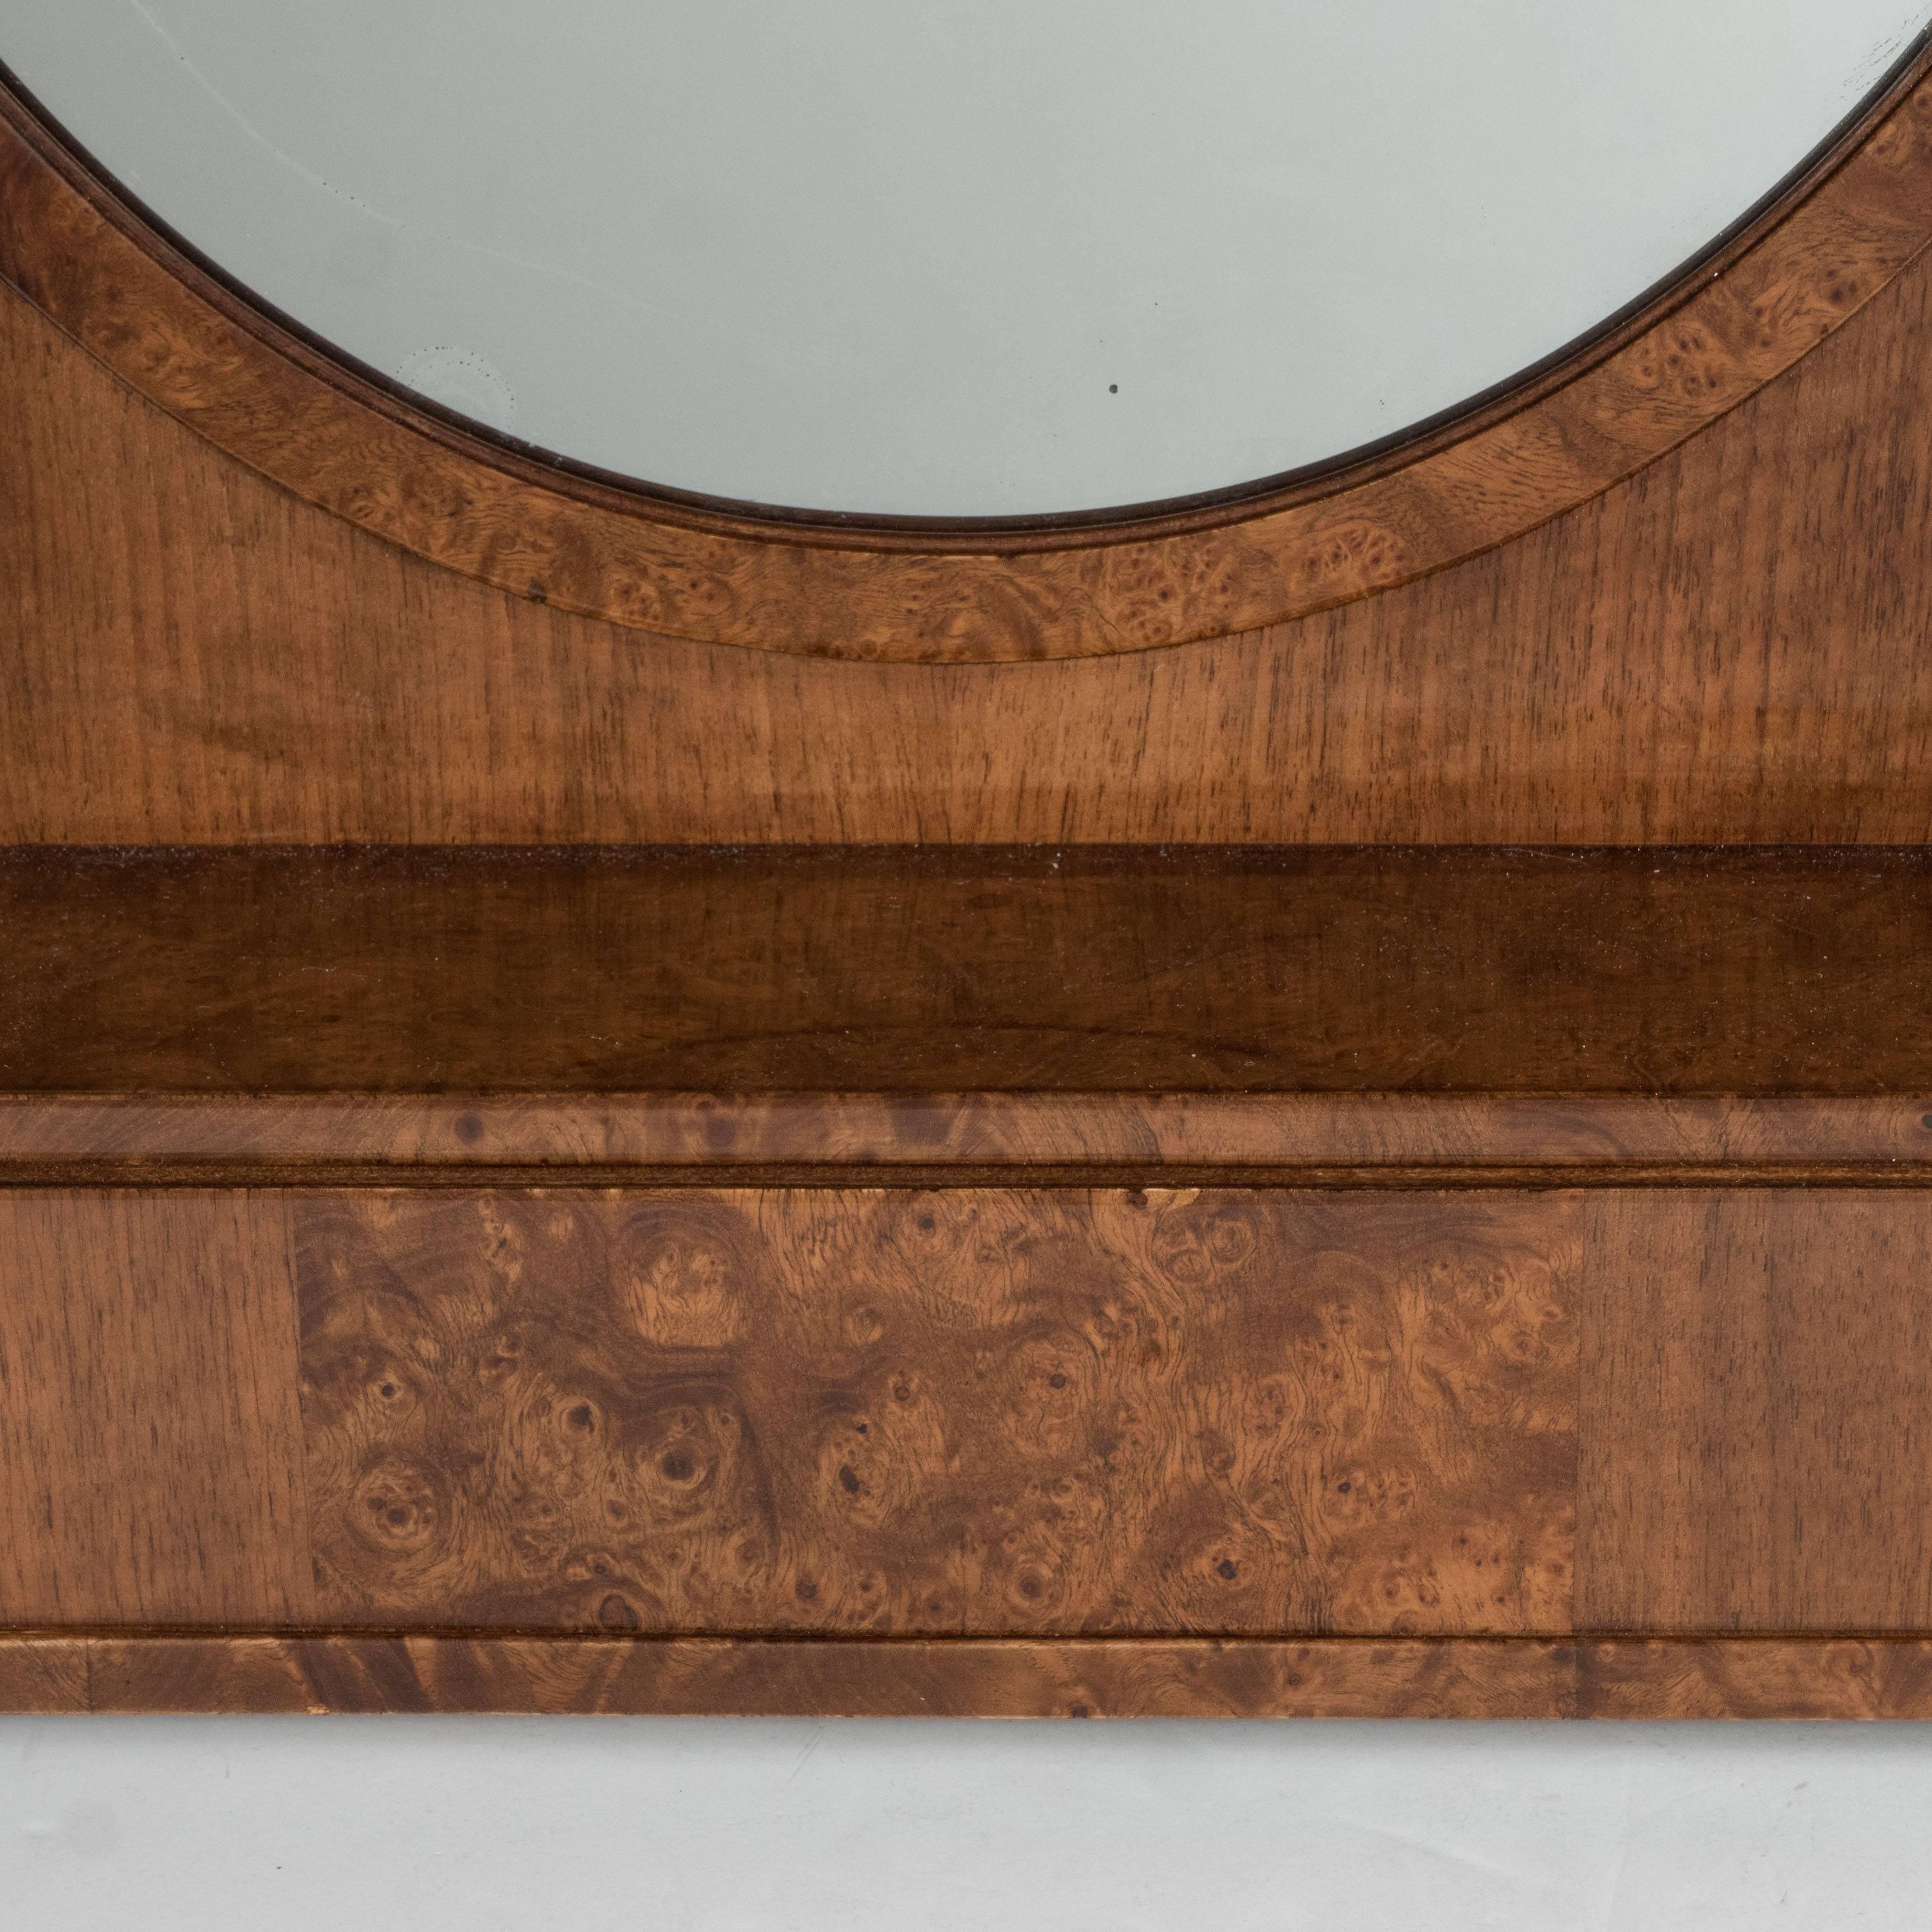 Exquisite Art Deco Book-Matched Exotic Wood Lady's Top Dresser Mirror 5